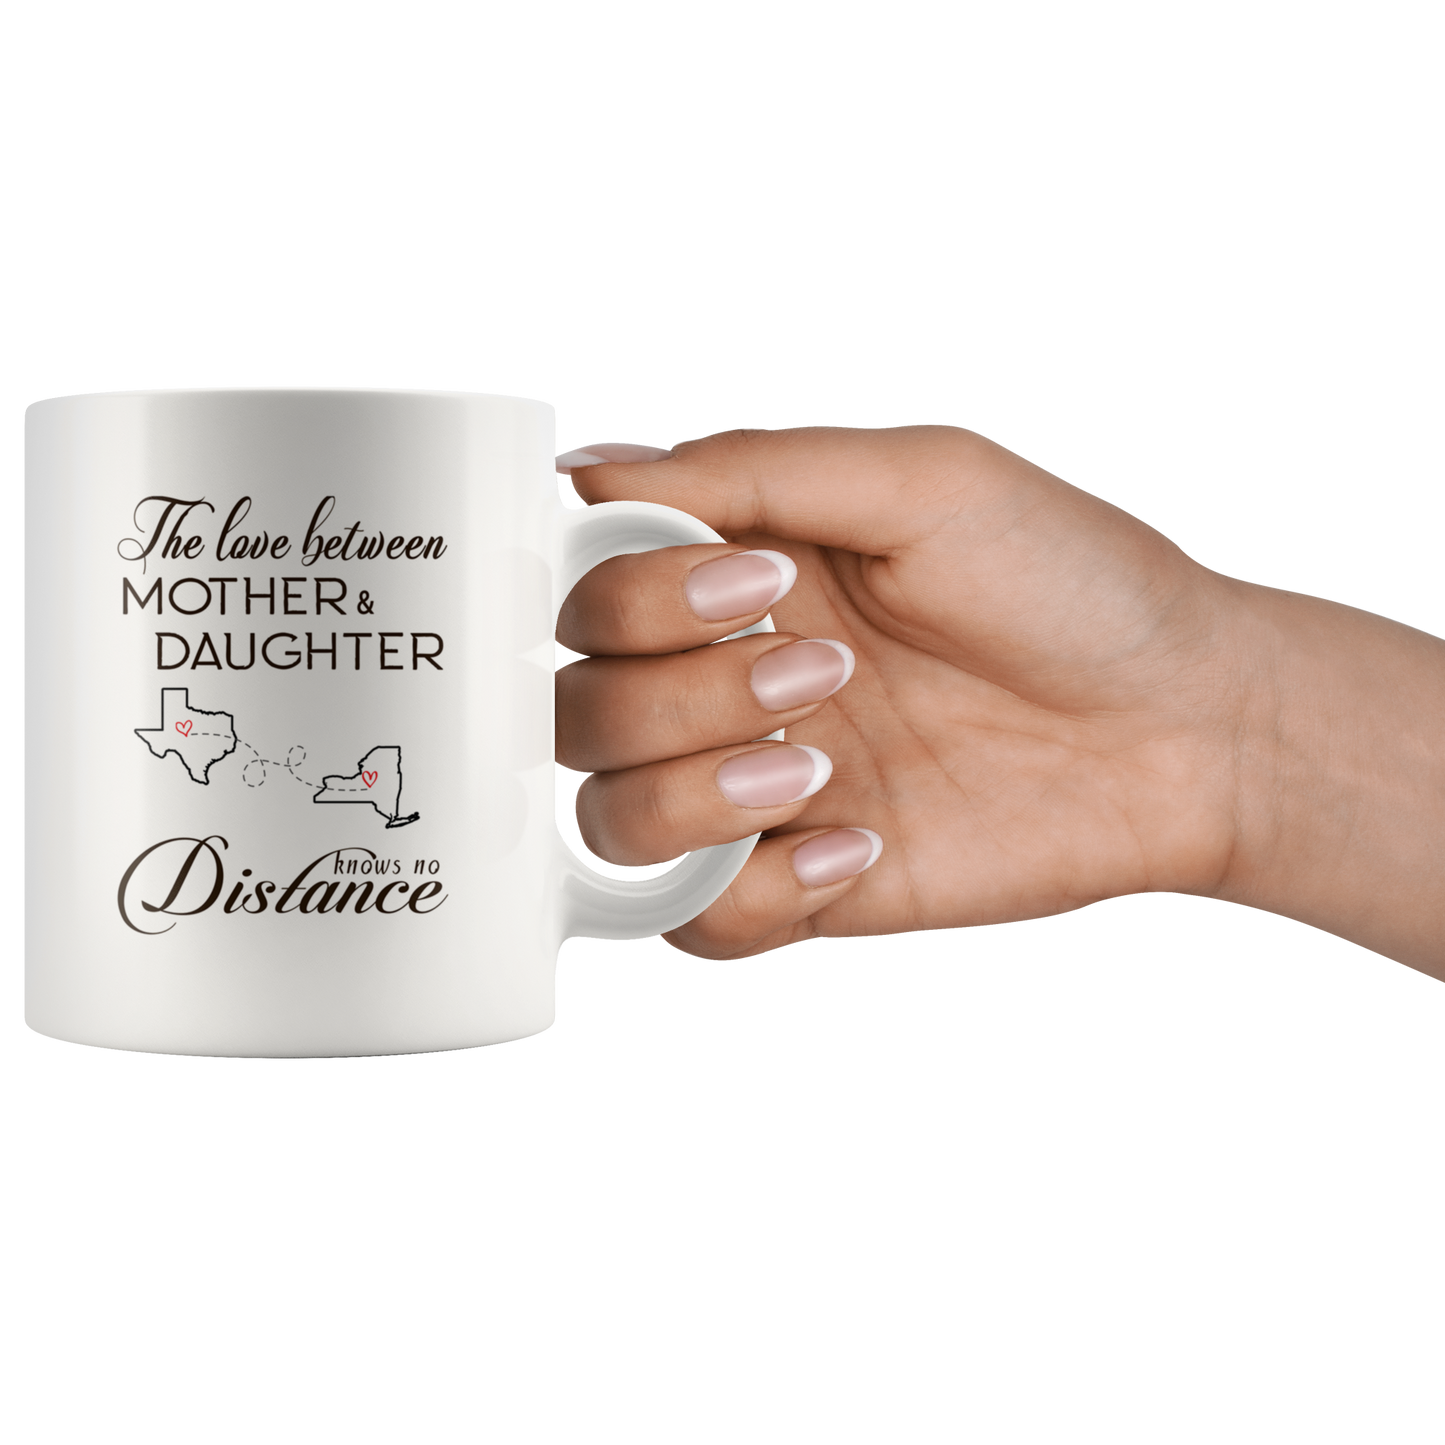 ND20604535-15oz-sp-23927 - [ Texas | New York | Mother And Daughter ]Personalized Long Distance State Coffee Mug - The Love Betwe